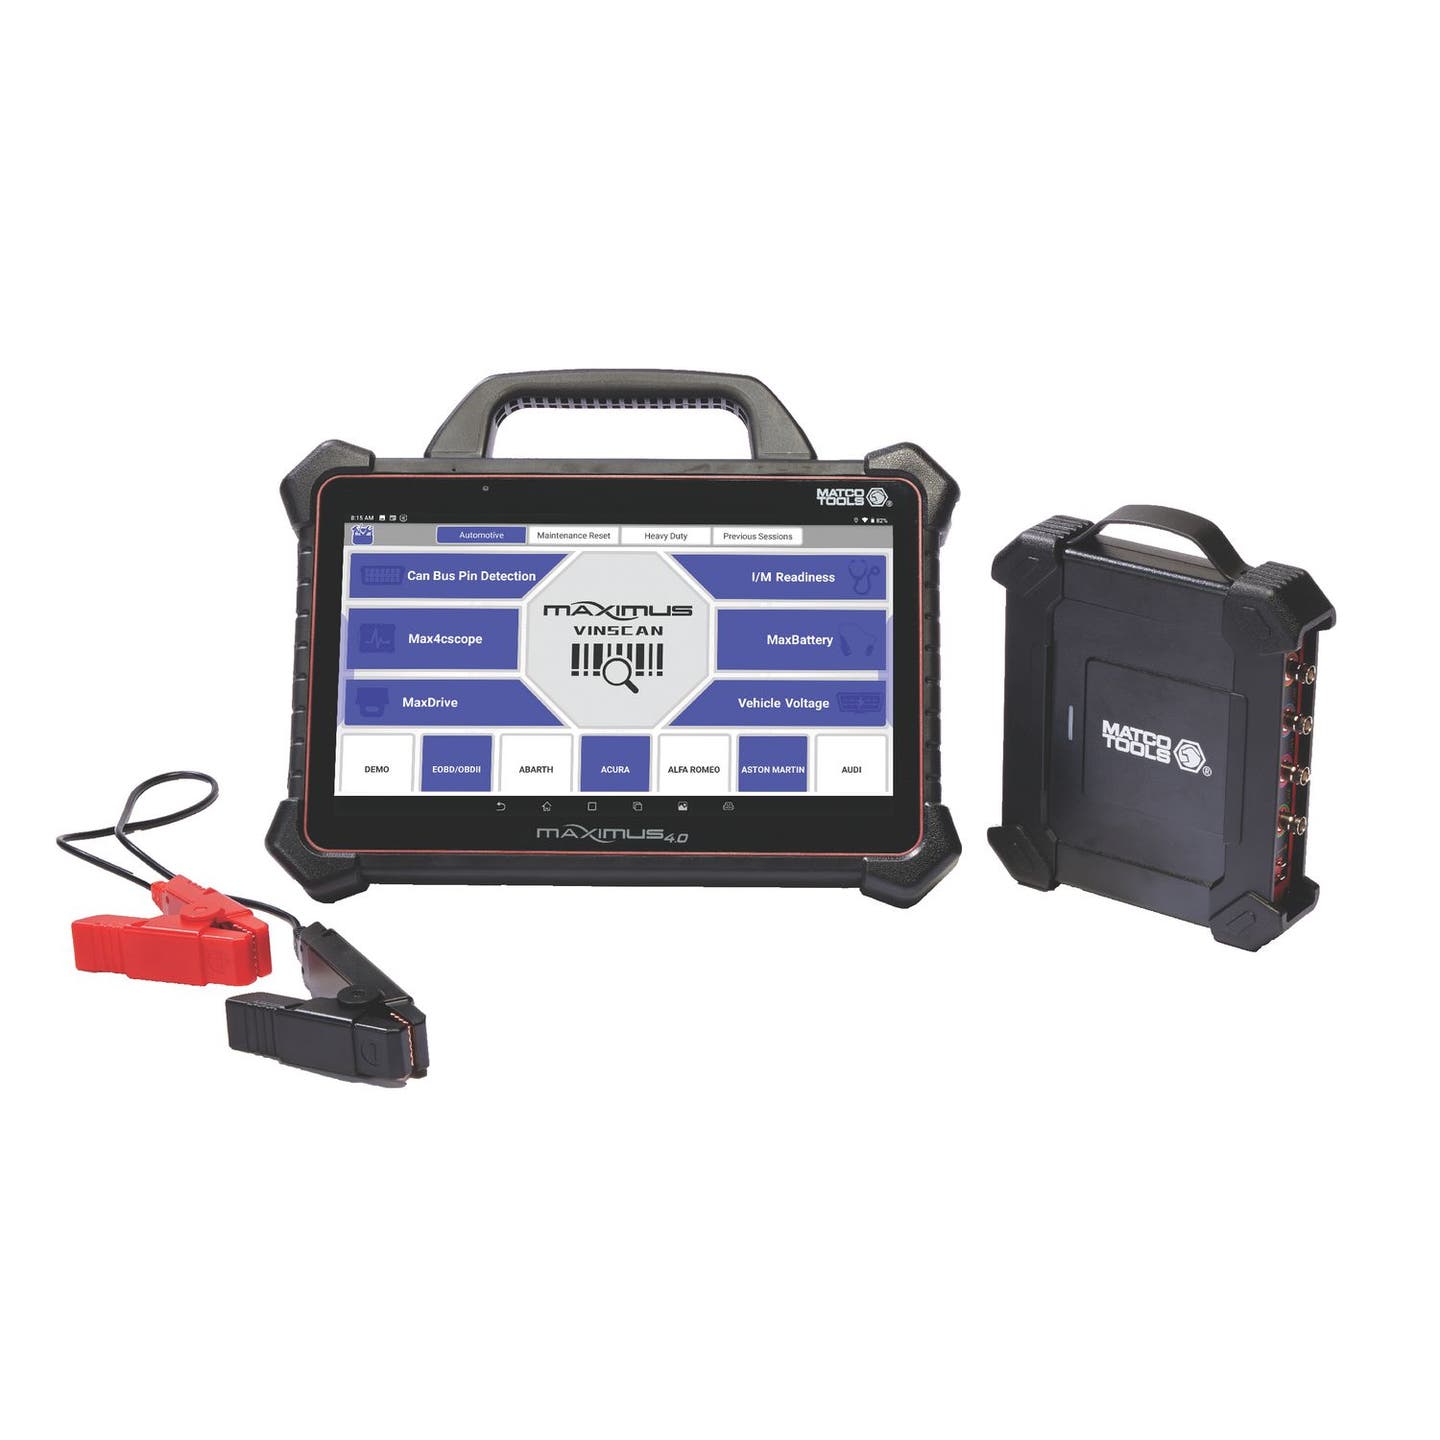 MAXIMUS 4.0 DIAGNOSTIC SCAN TOOL WITH PASSENGER CAR AND HEAVY-DUTY SOFTWARE